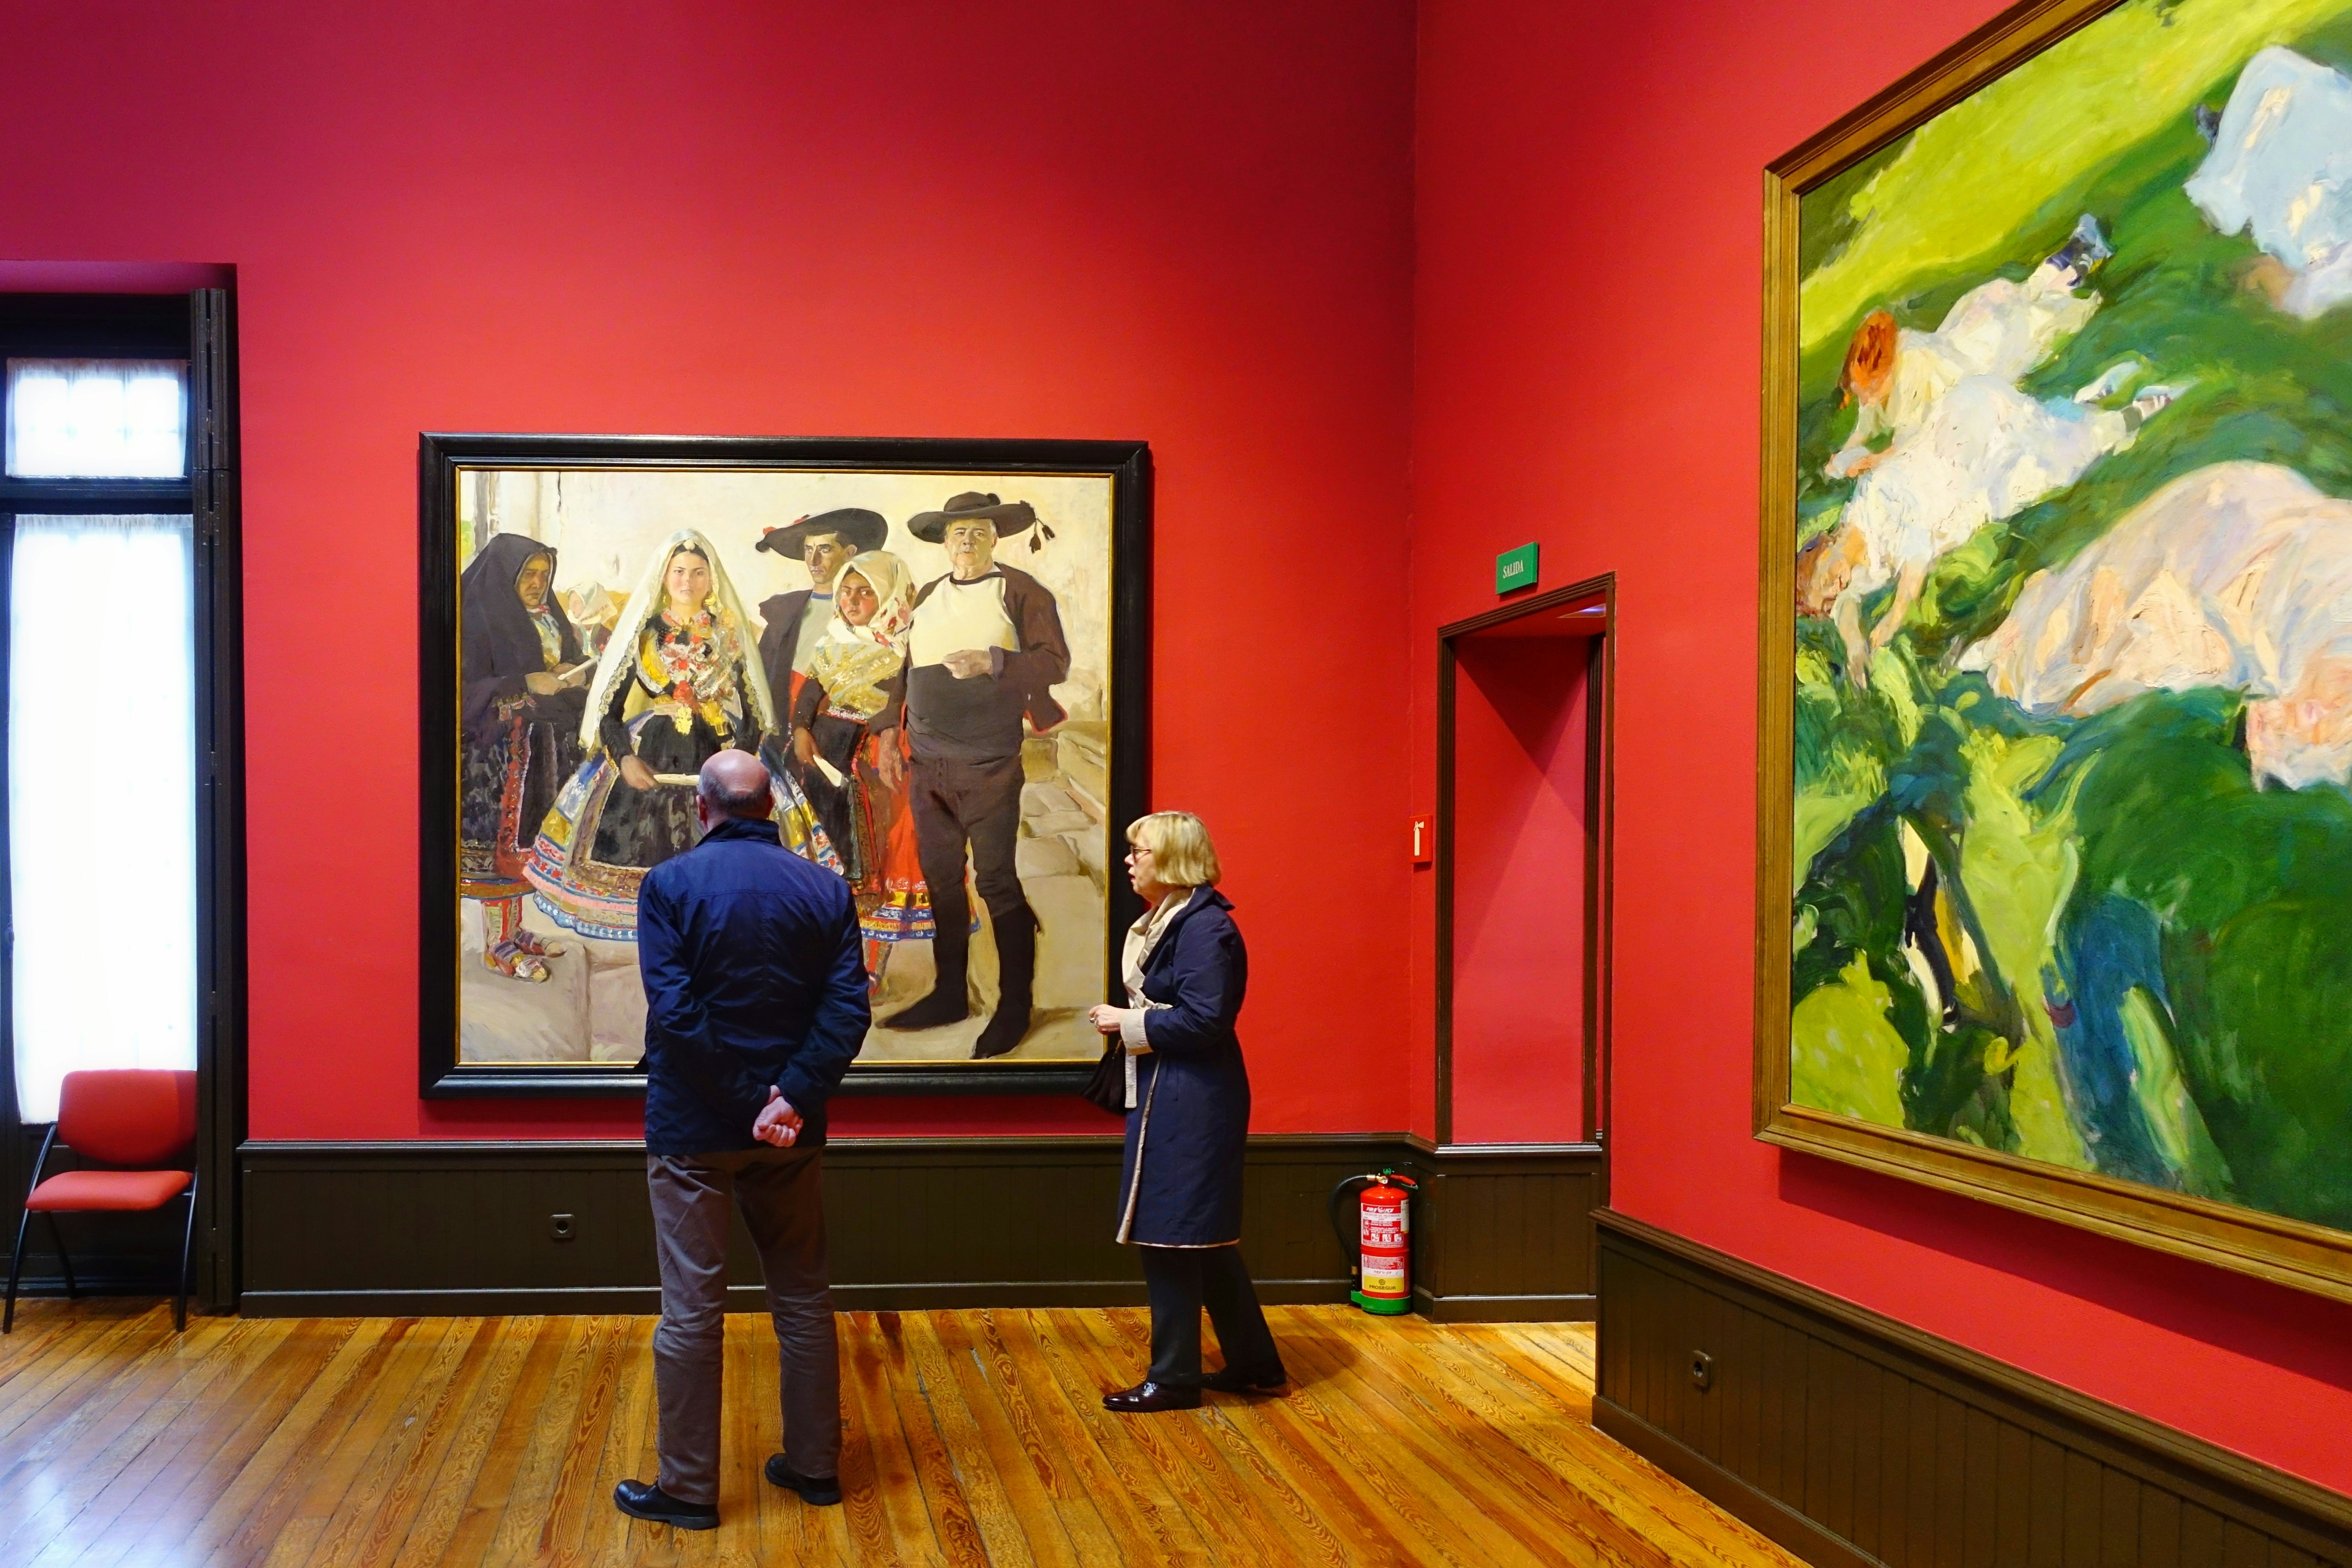 A couple admiring art in the Museo Sorolla, Madrid.